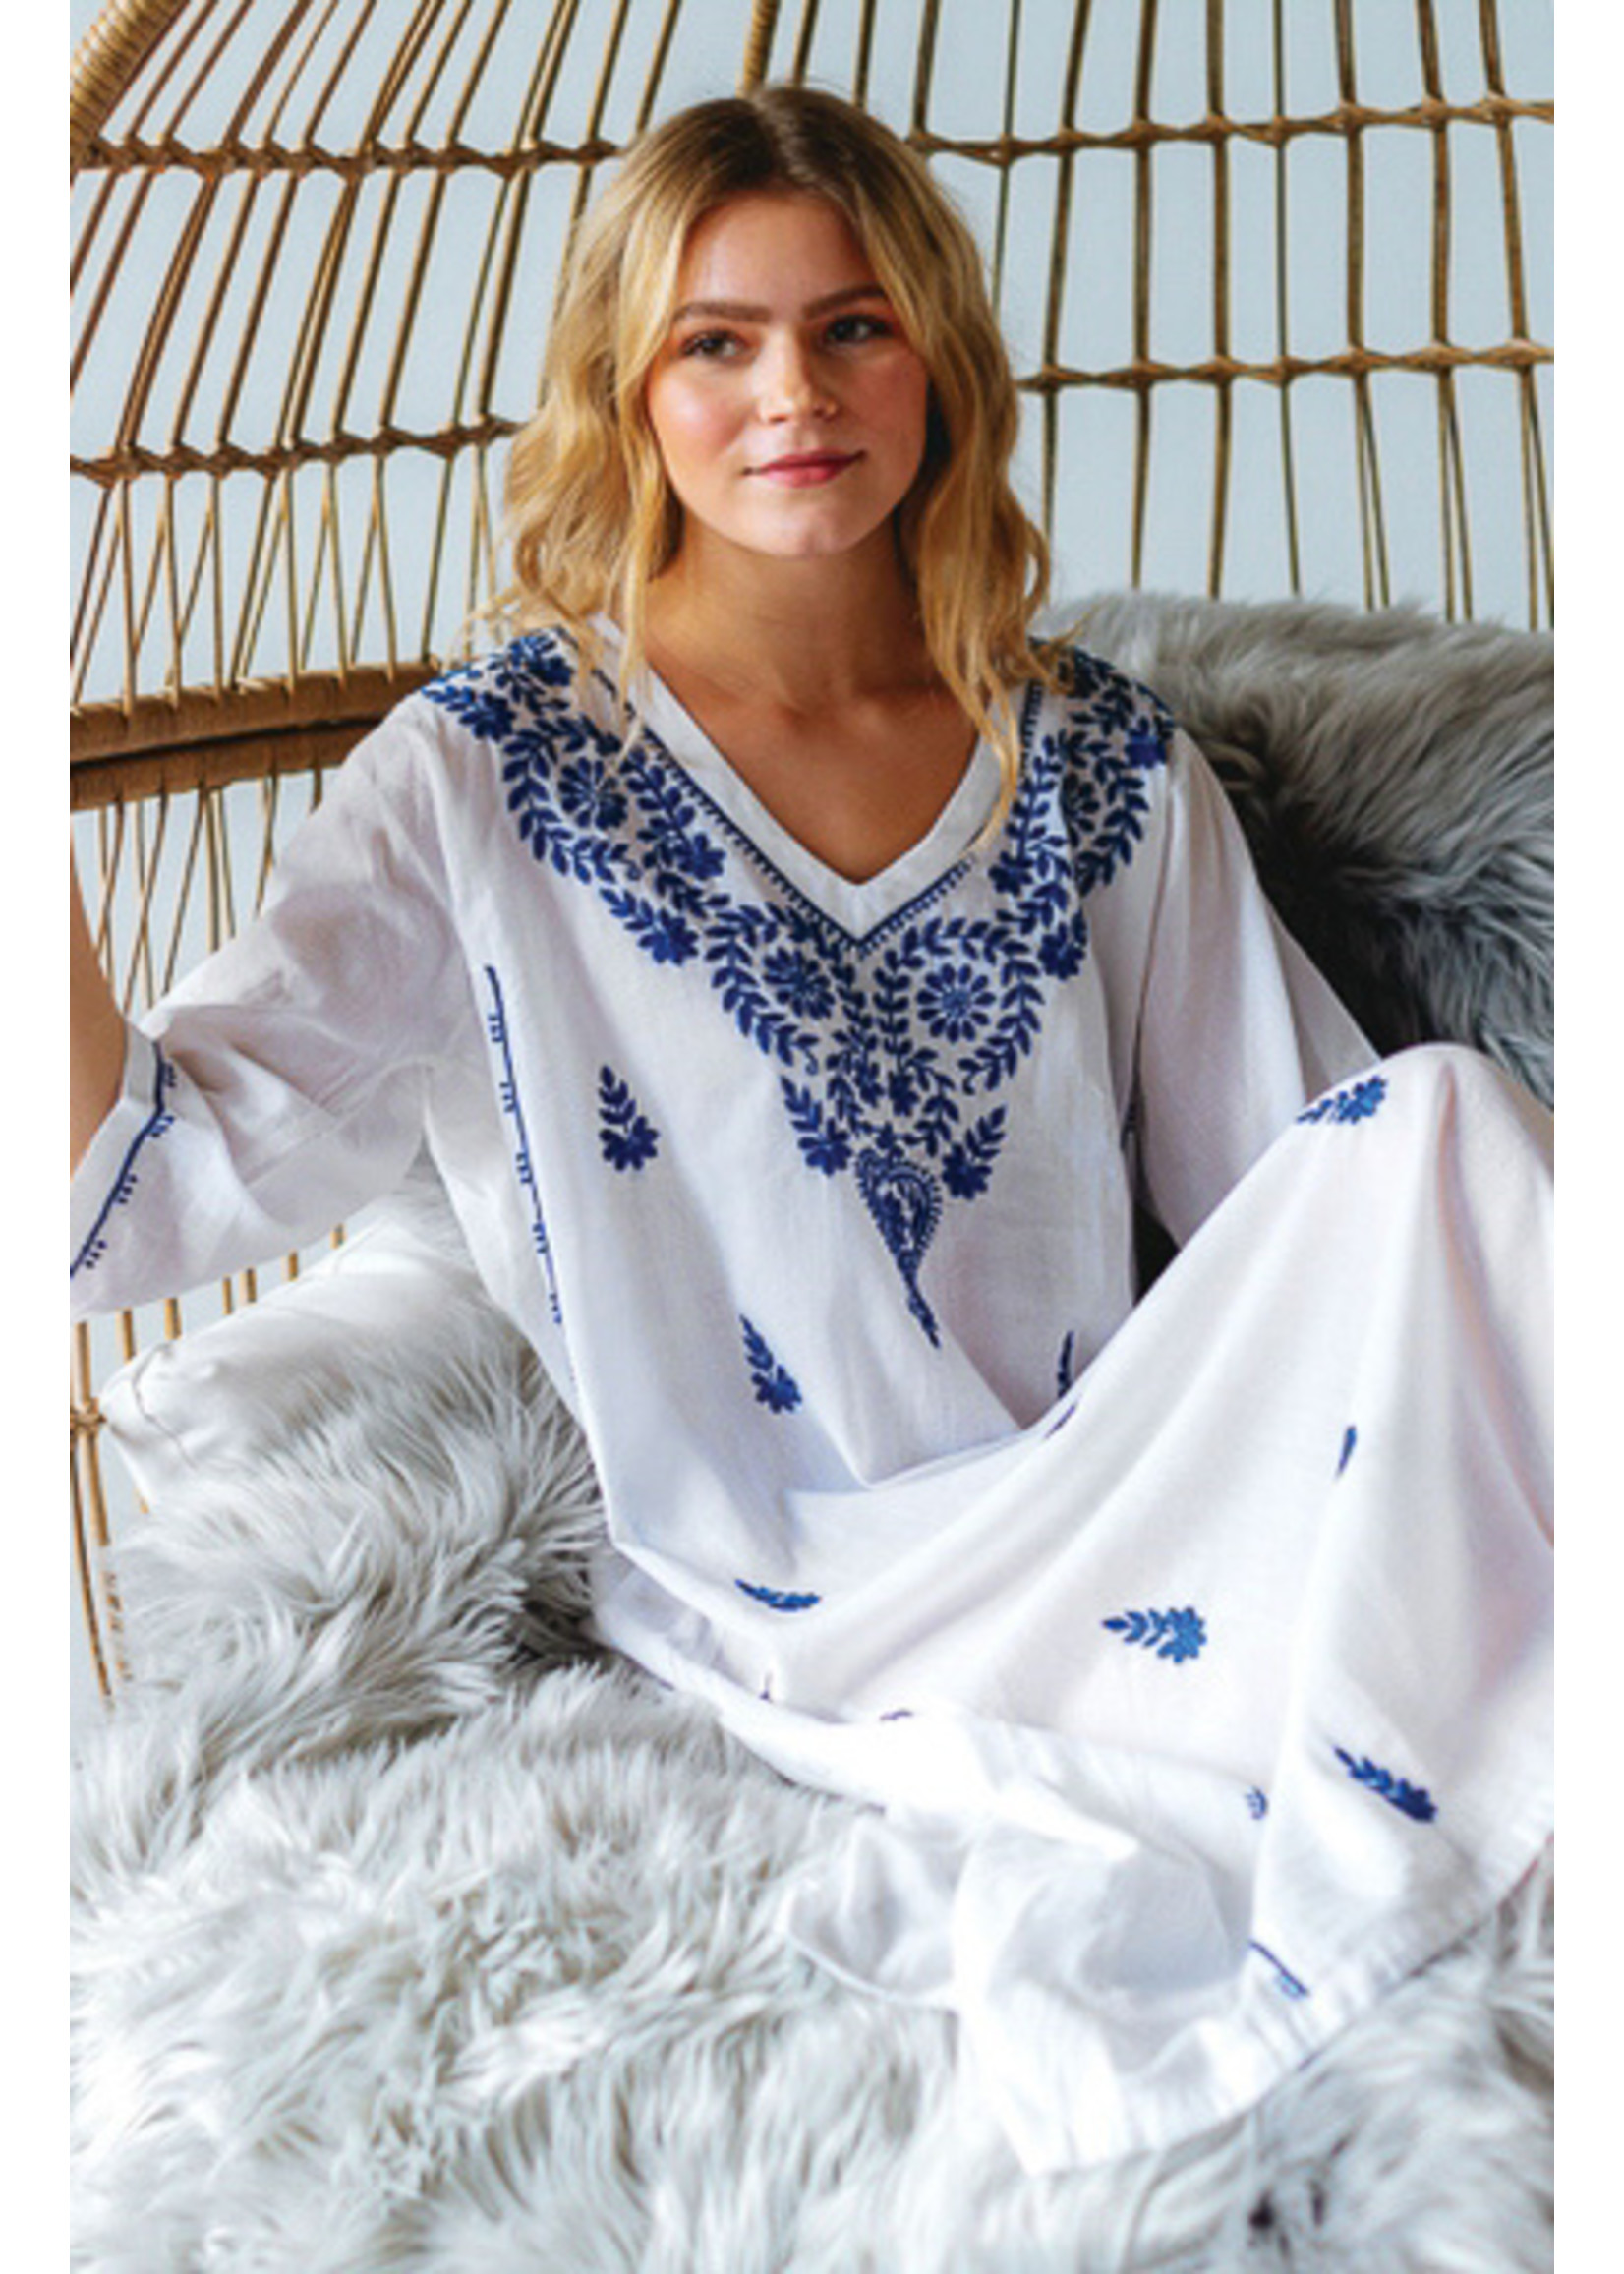 Parama Embroidered Caftans